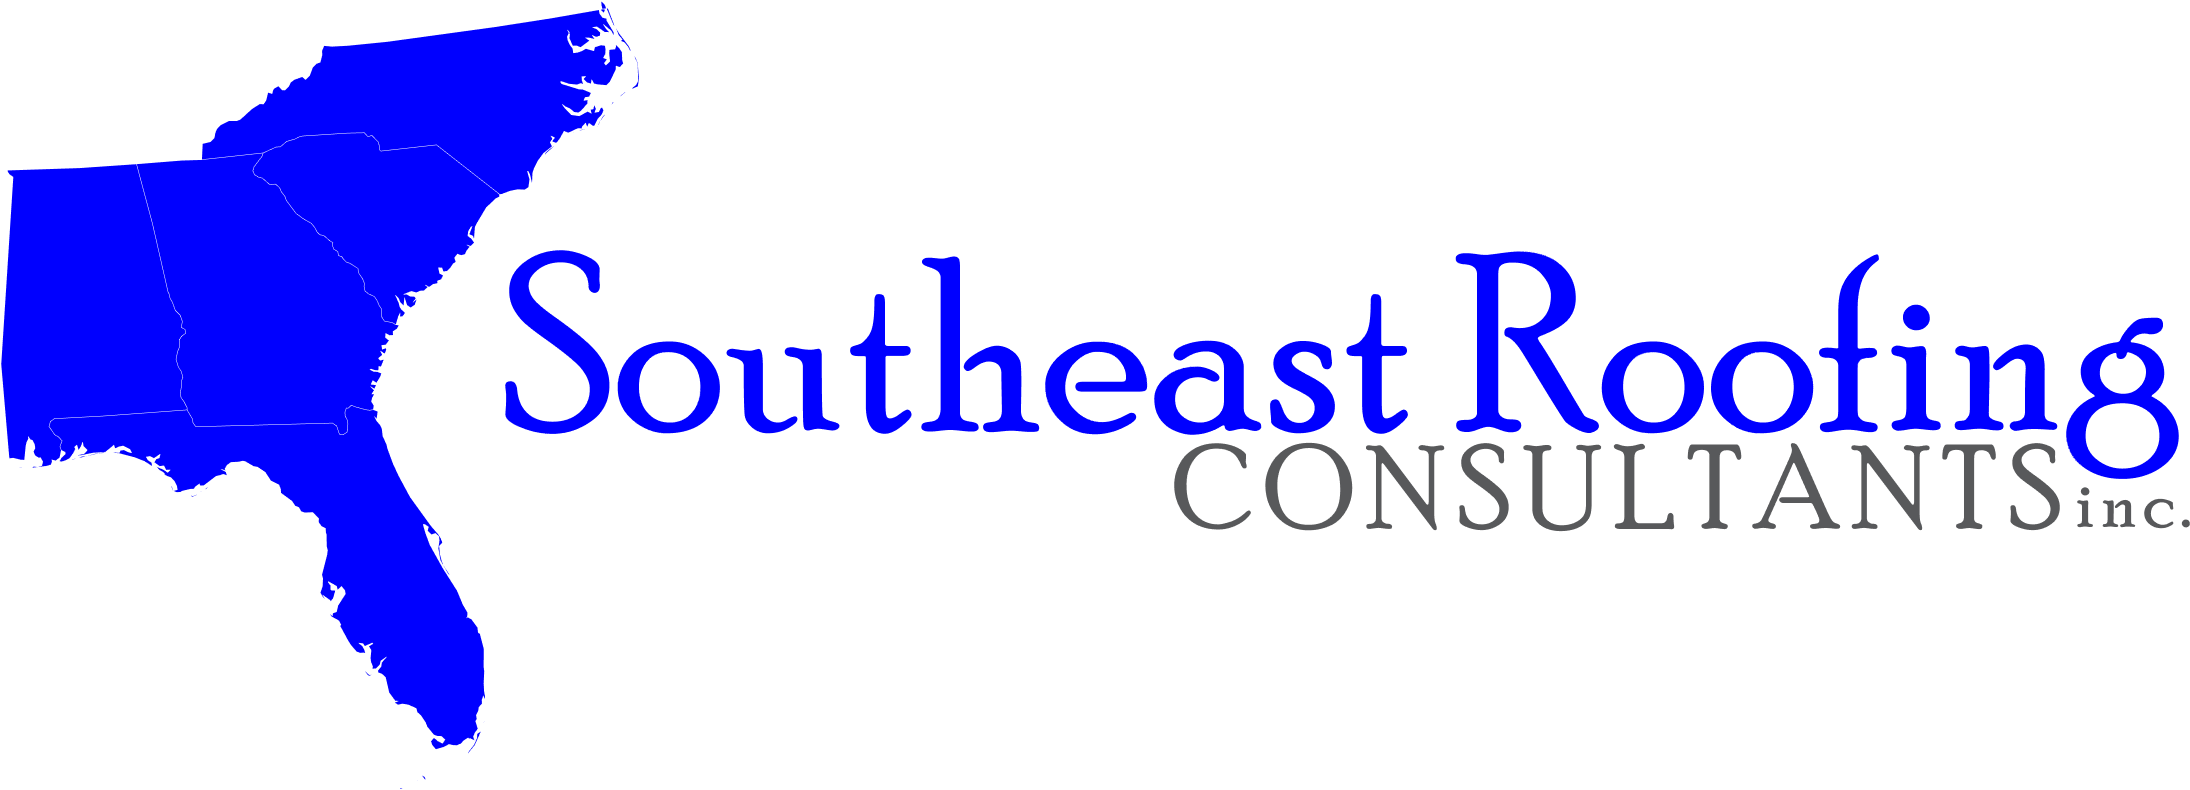 Southeast Roofing Consultants Logo.png